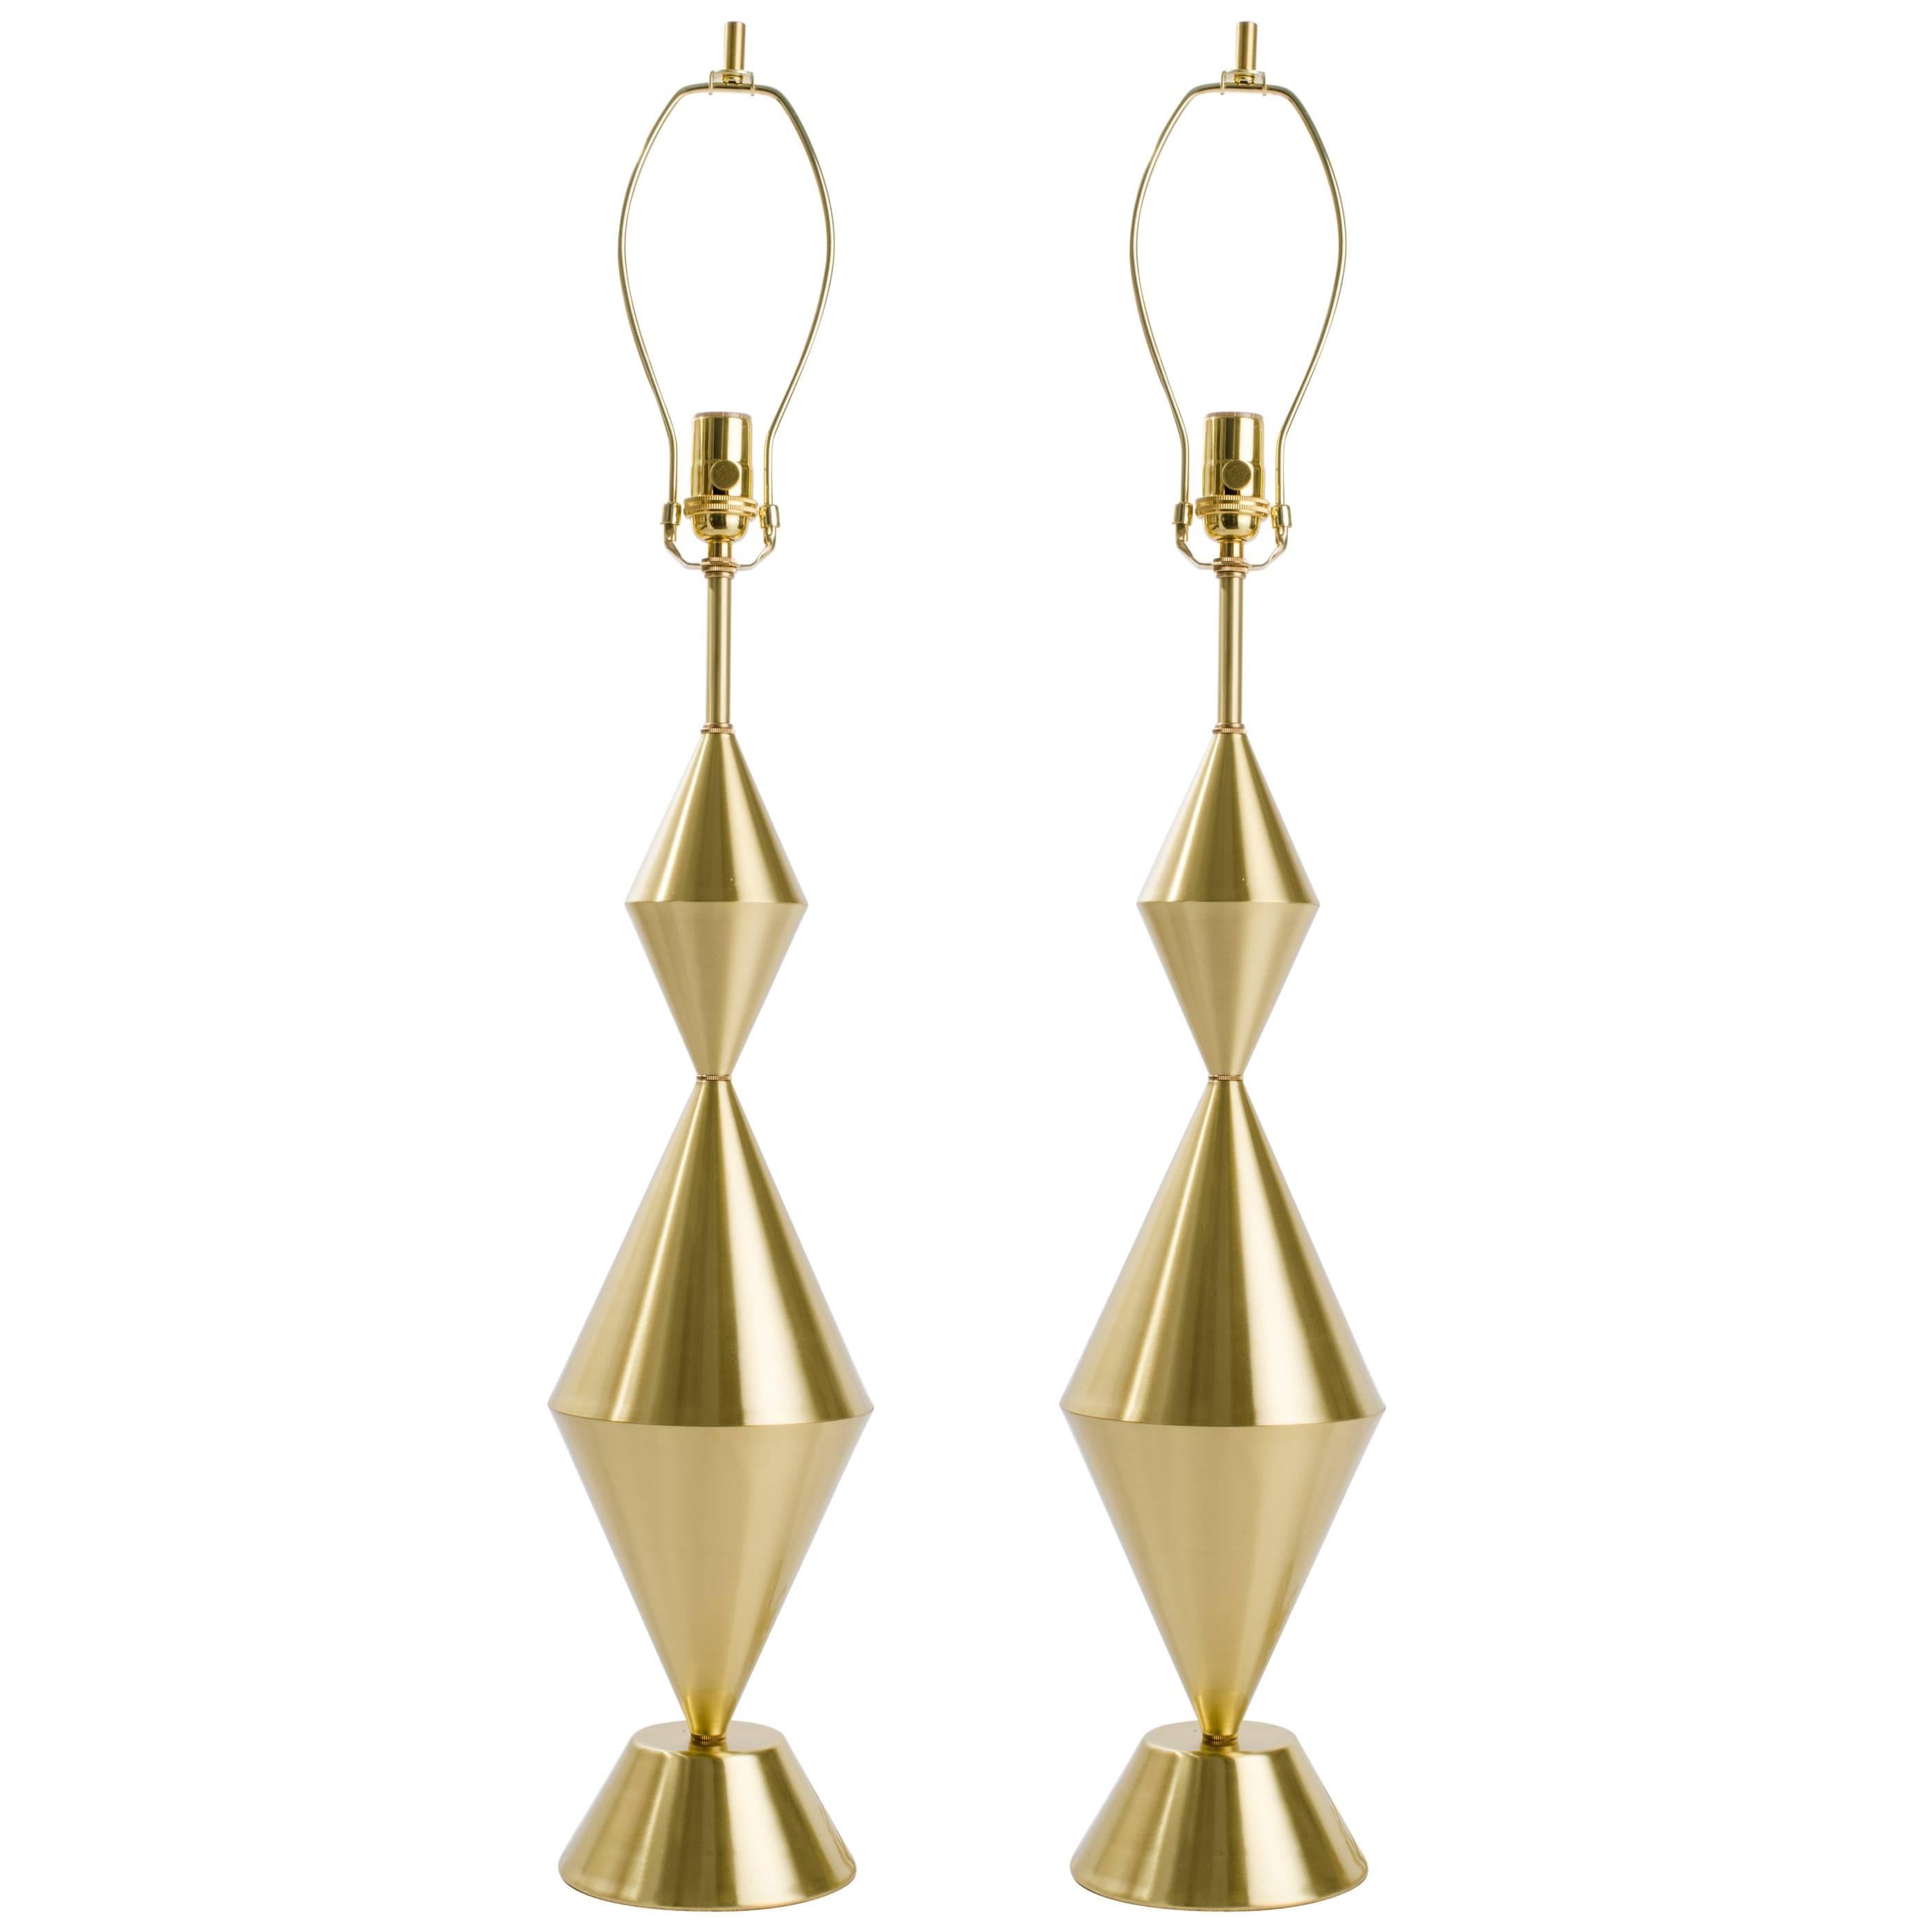 Pair of Fashioned by Hand Conical Brass Lamps